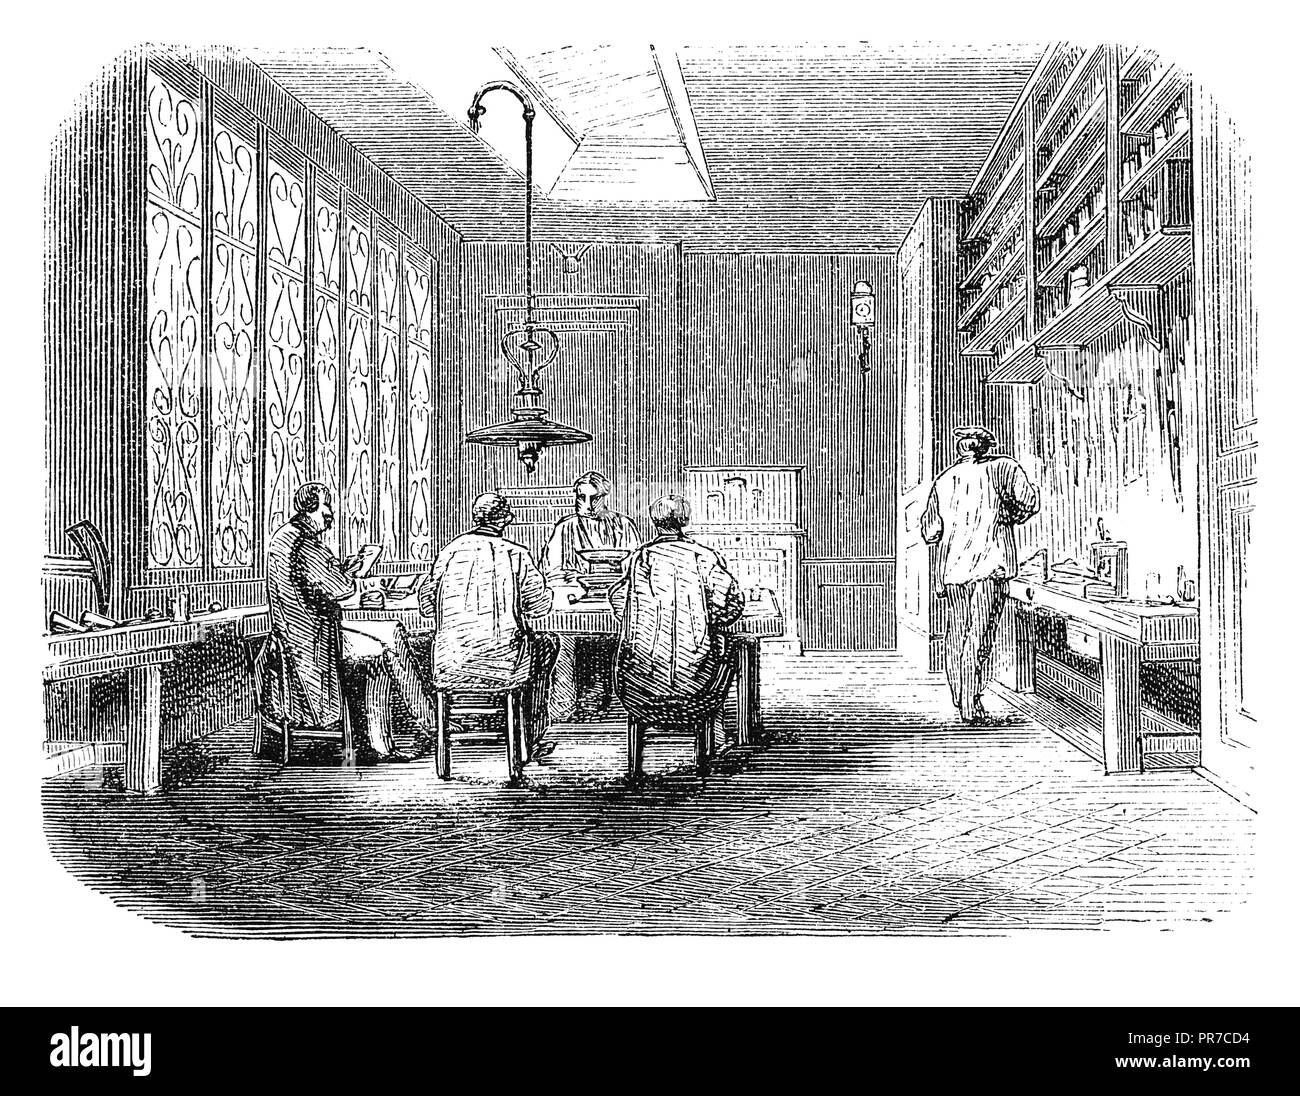 19th century illustration of  making cases in jewellery workshop. Published in 'The Practical Magazine, an Illustrated Cyclopedia of Industrial News,  Stock Photo